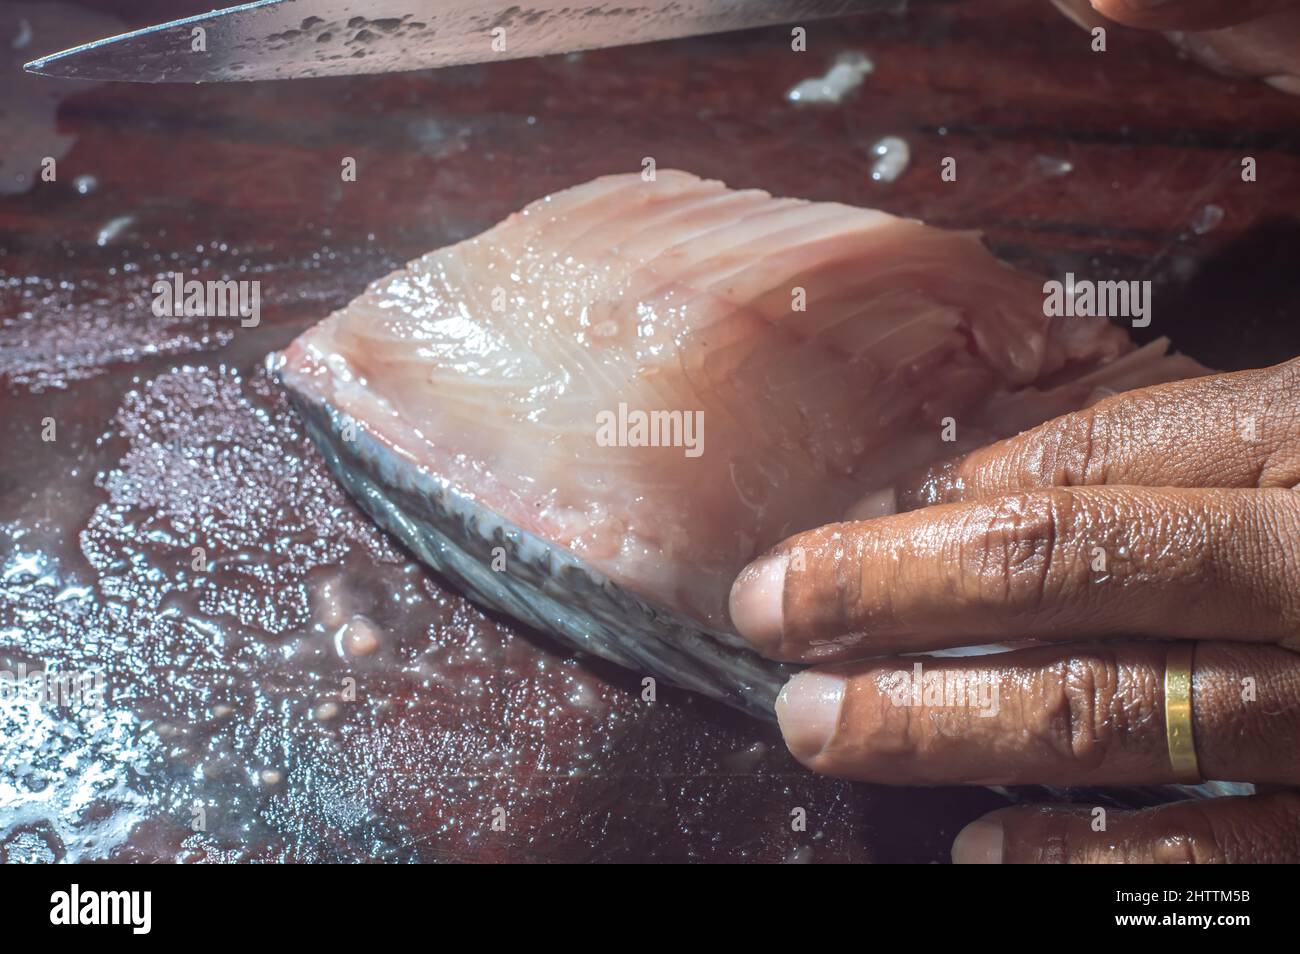 How to scrape tilapia fish using a knife,man wiping a fish on a wooden table. Stock Photo